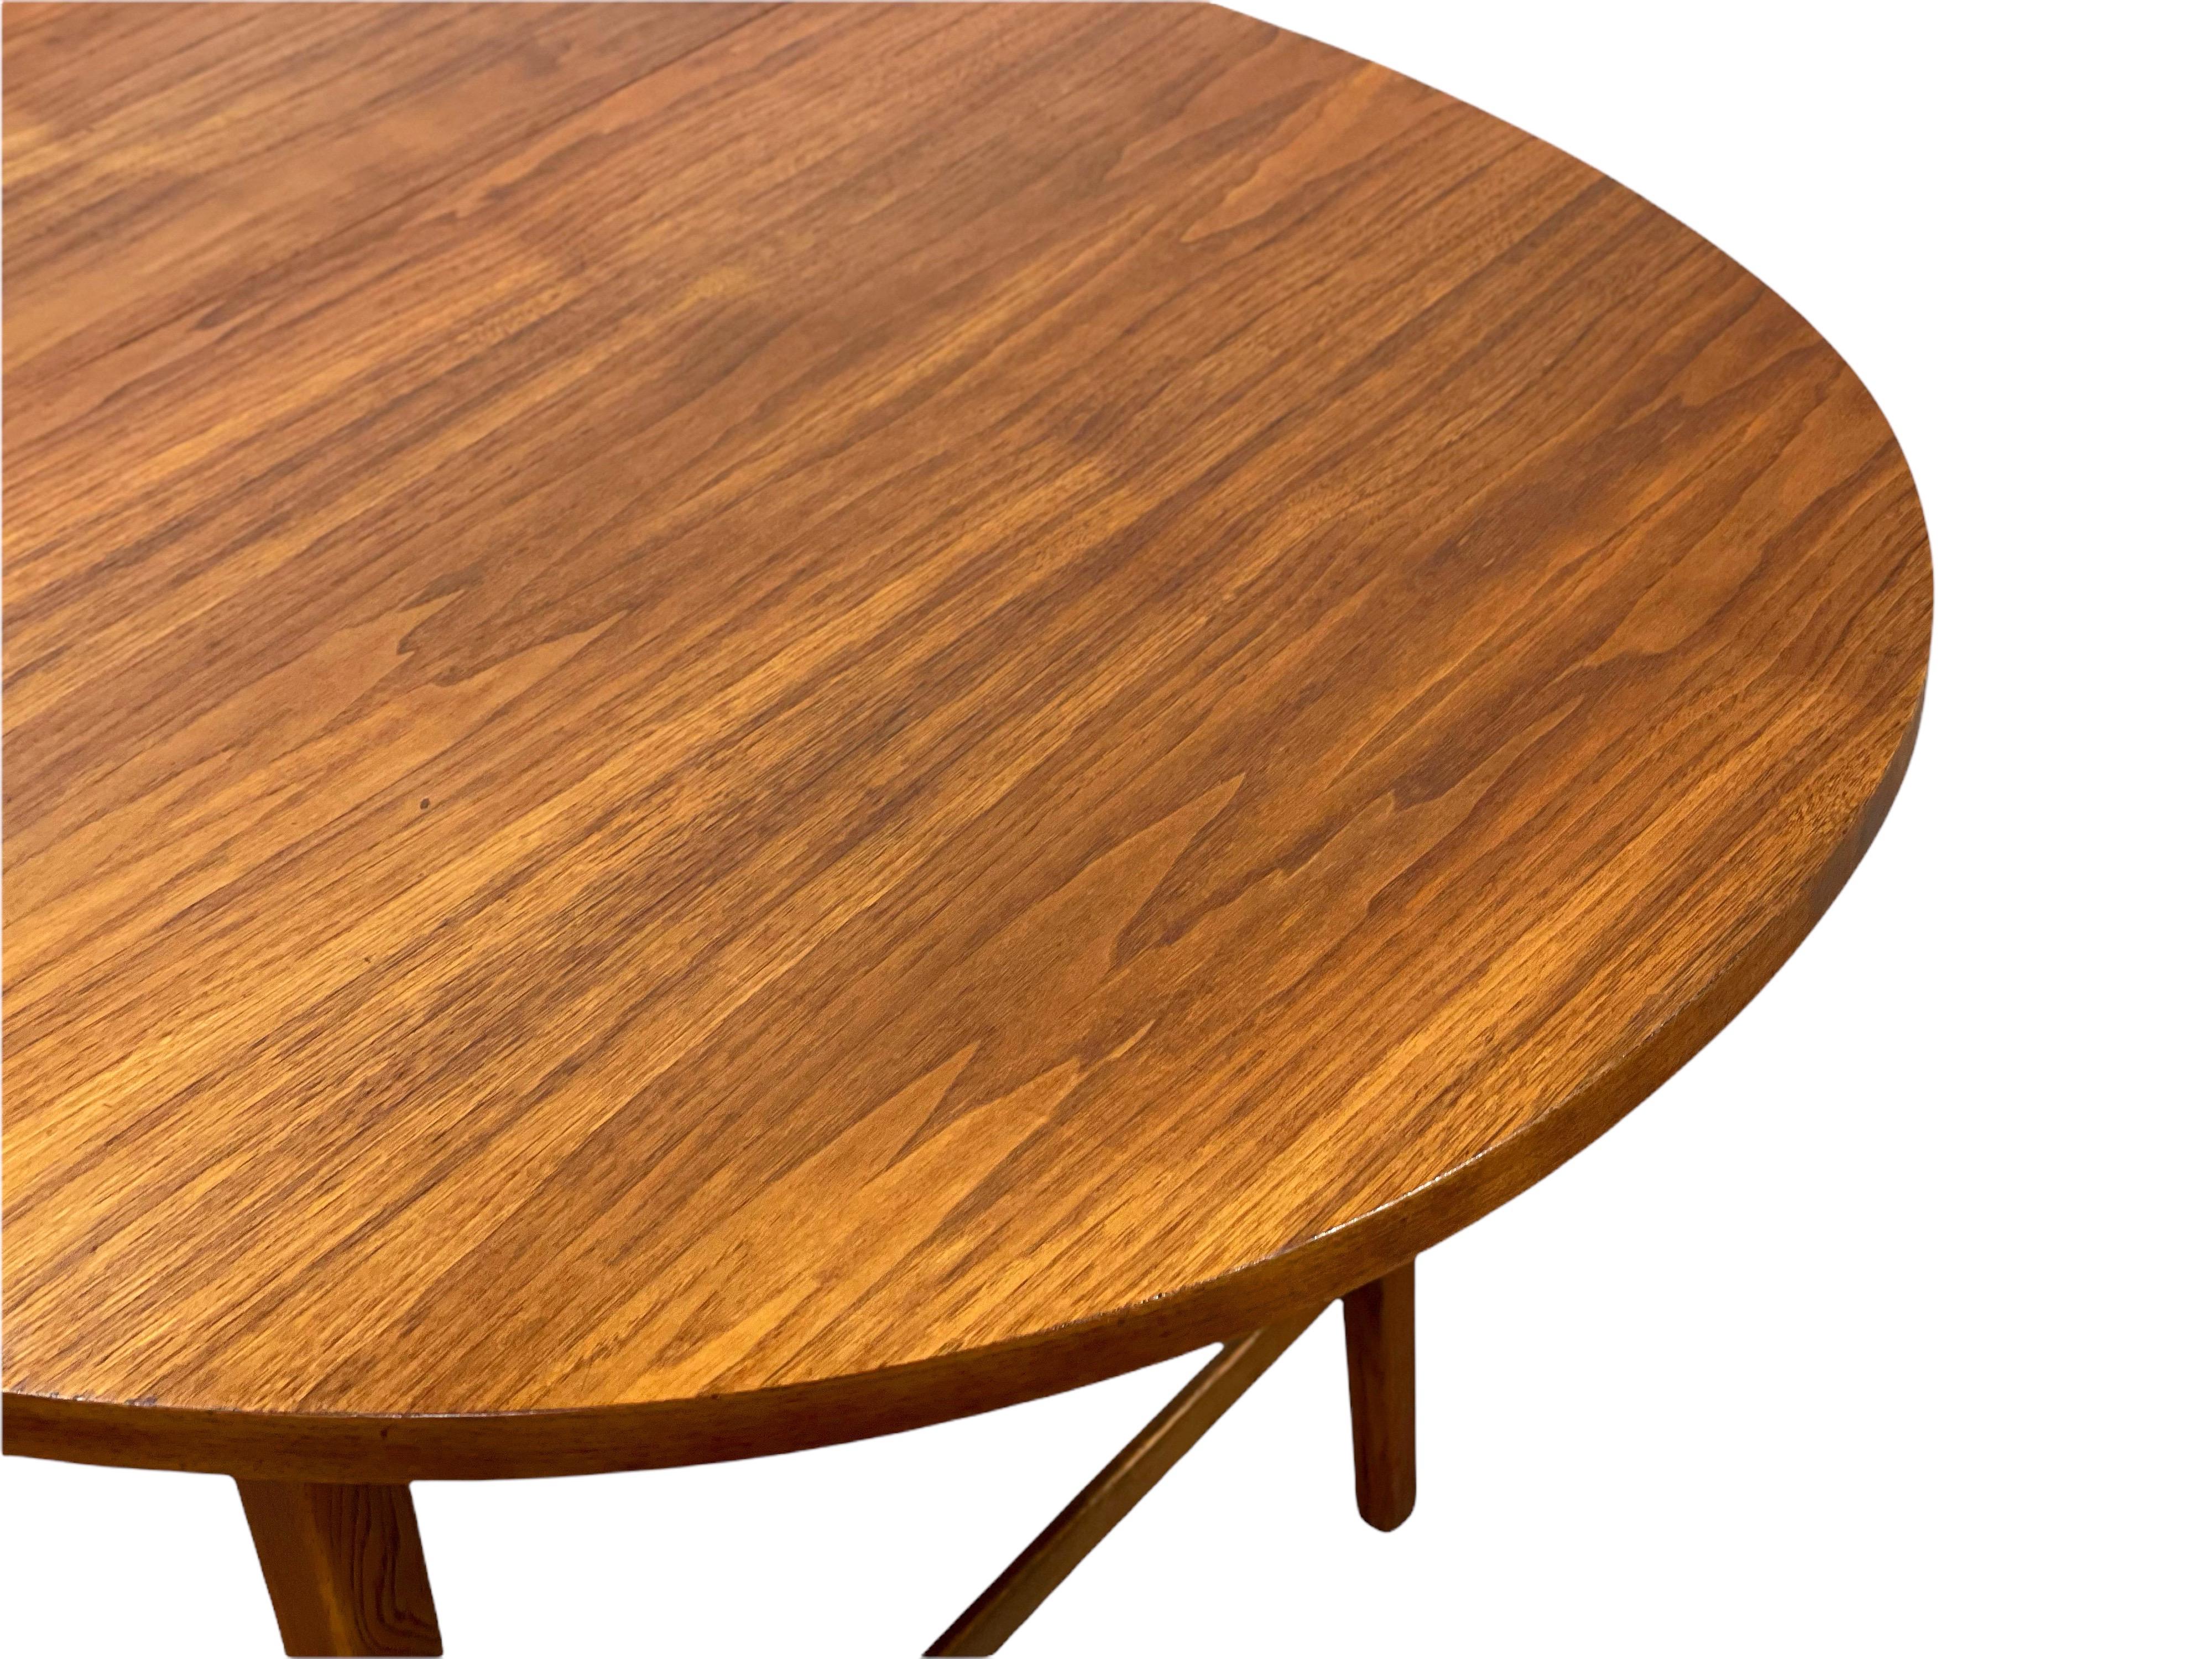 Rare walnut oval draw leaf dining table by Paul McCobb for his Components line. Seldom seen, this example is unique on the market. Similar to the Connoisseur line in design and dimensions, the Components tables features solid walnut cross stretchers